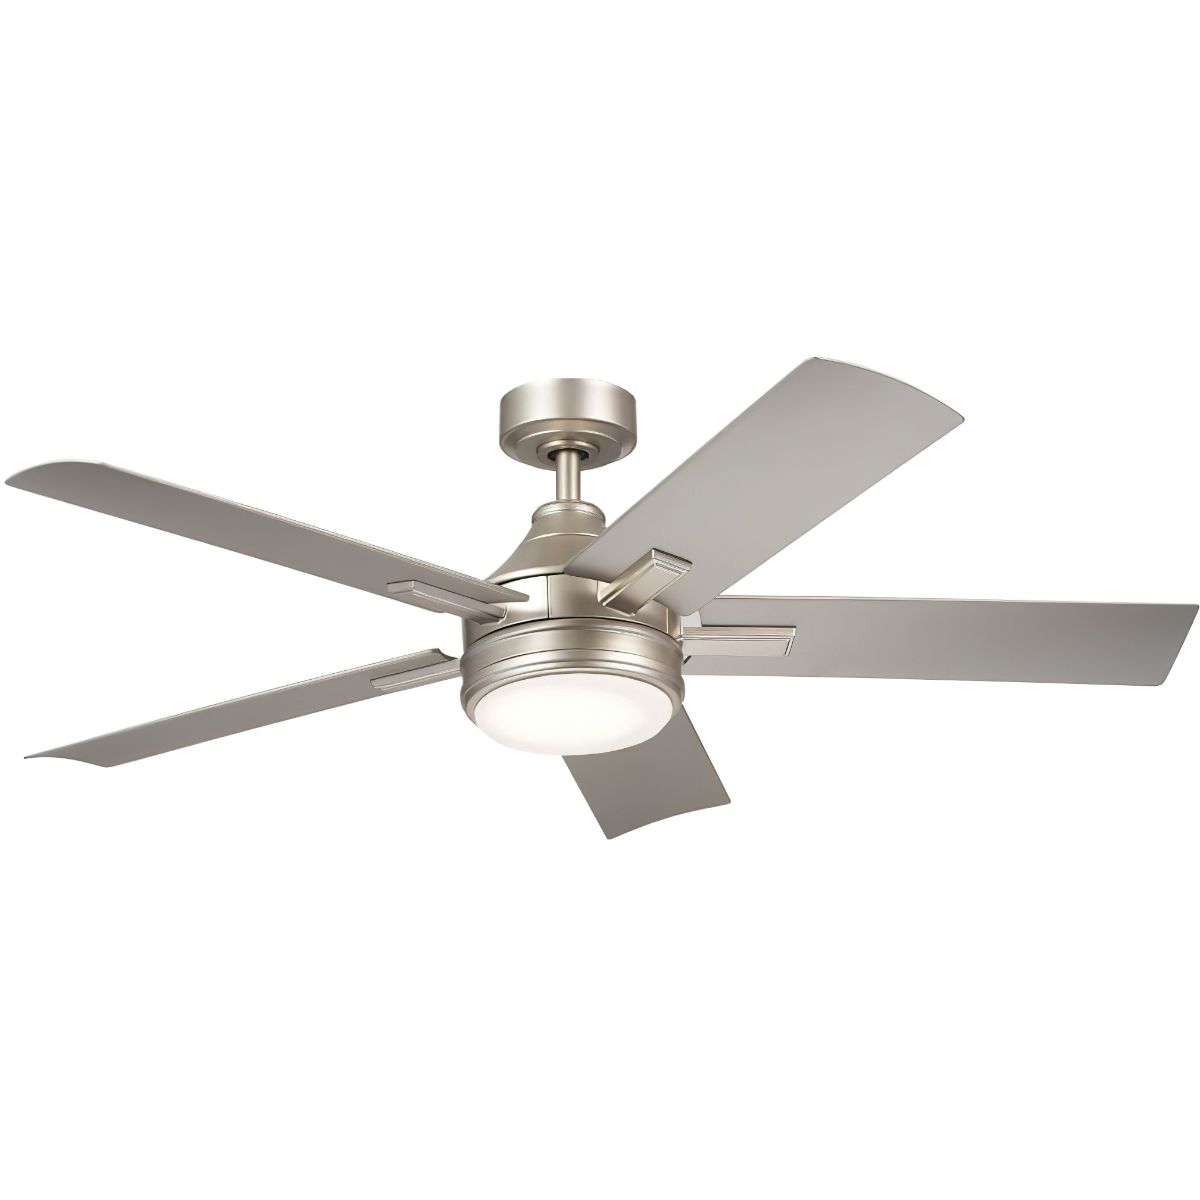 Tide 52 Inch Outdoor Ceiling Fan With Light And Remote, Marine Grade, Brushed Nickel with Silver Blades